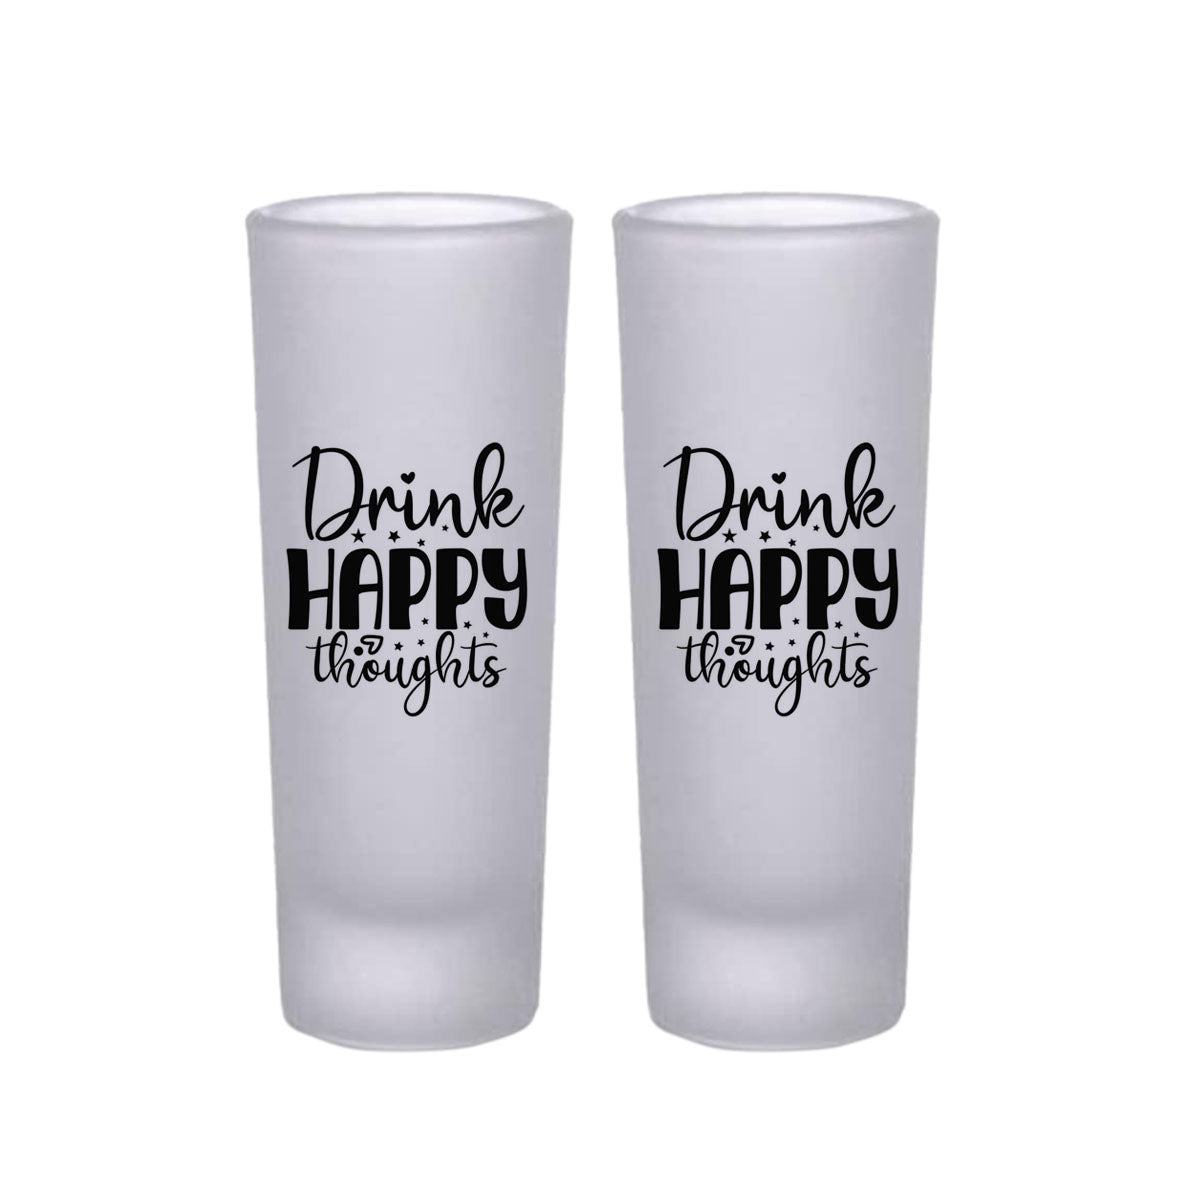 Frosted Shooter Glasses Design - Drink Happy Thoughts